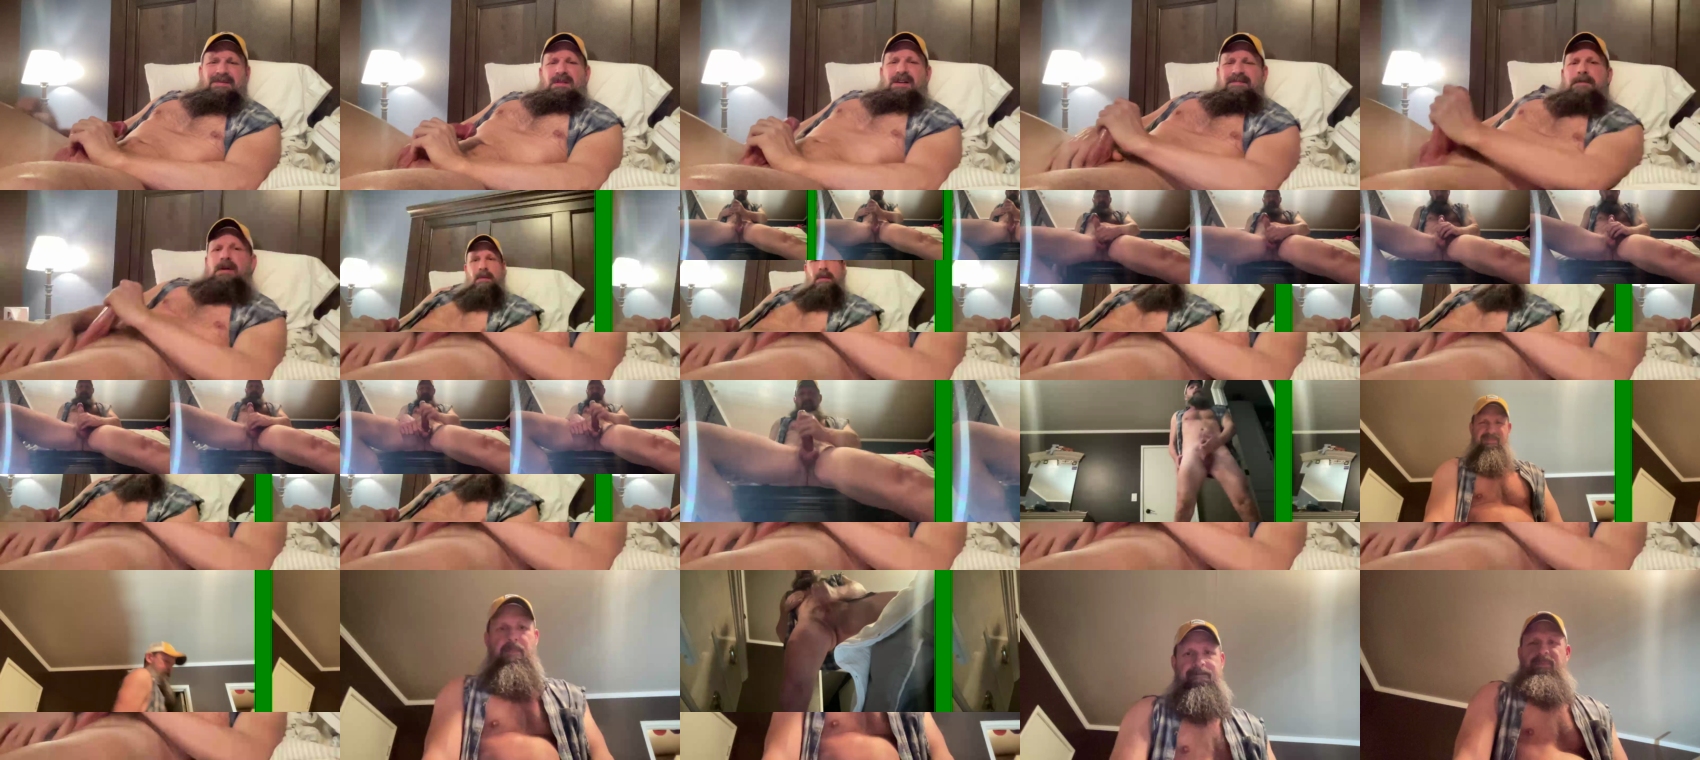 joestros  22-02-2023 Recorded Video jerkoff